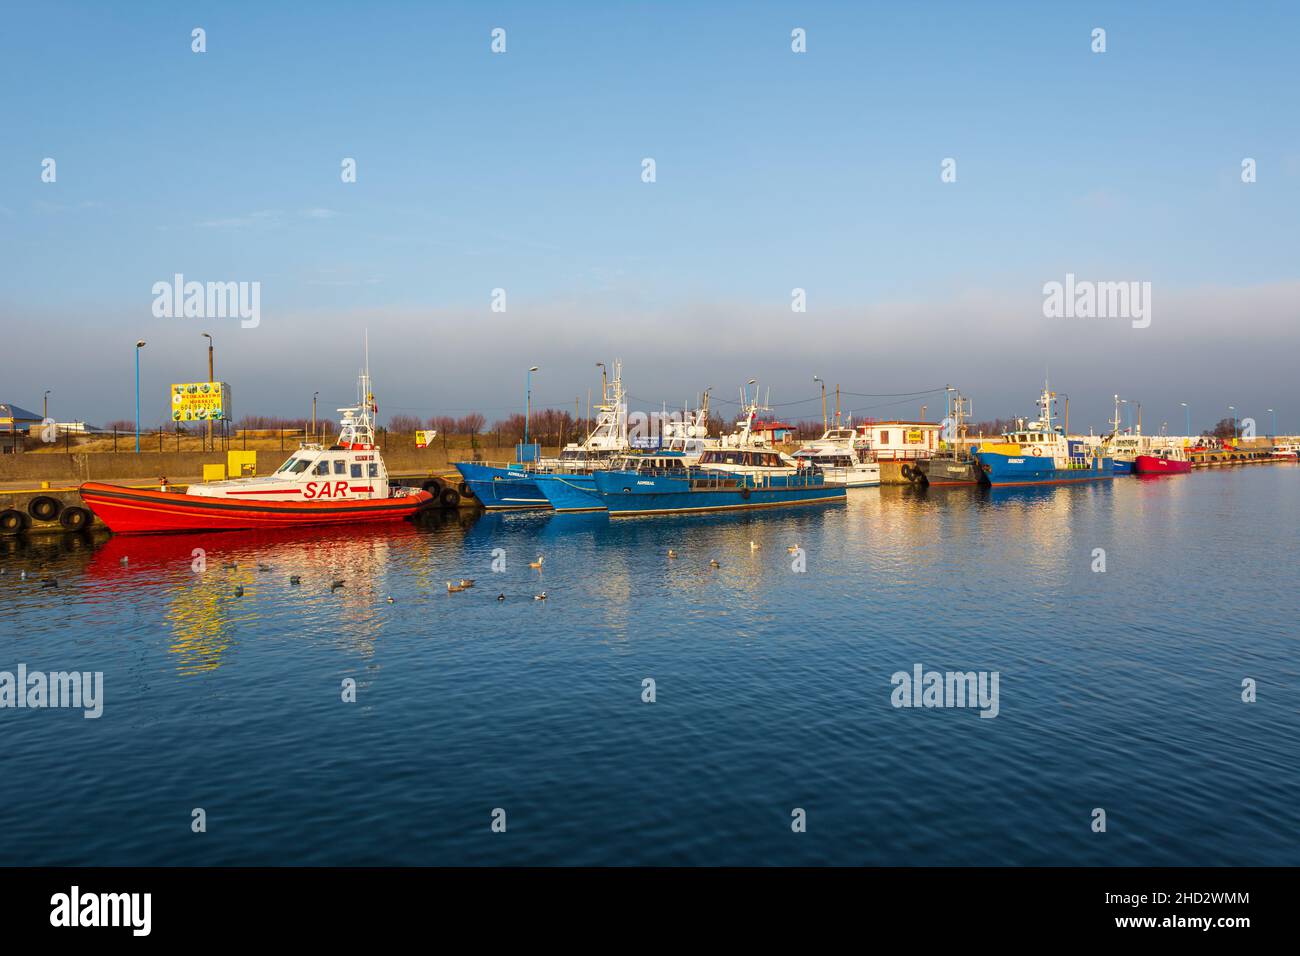 Wladyslawowo, Poland - January 27, 2017: Boats docked in Wladyslawowo port. The Wladyslawowo is one of the most popular places in Kashubia. Baltic Sea Stock Photo